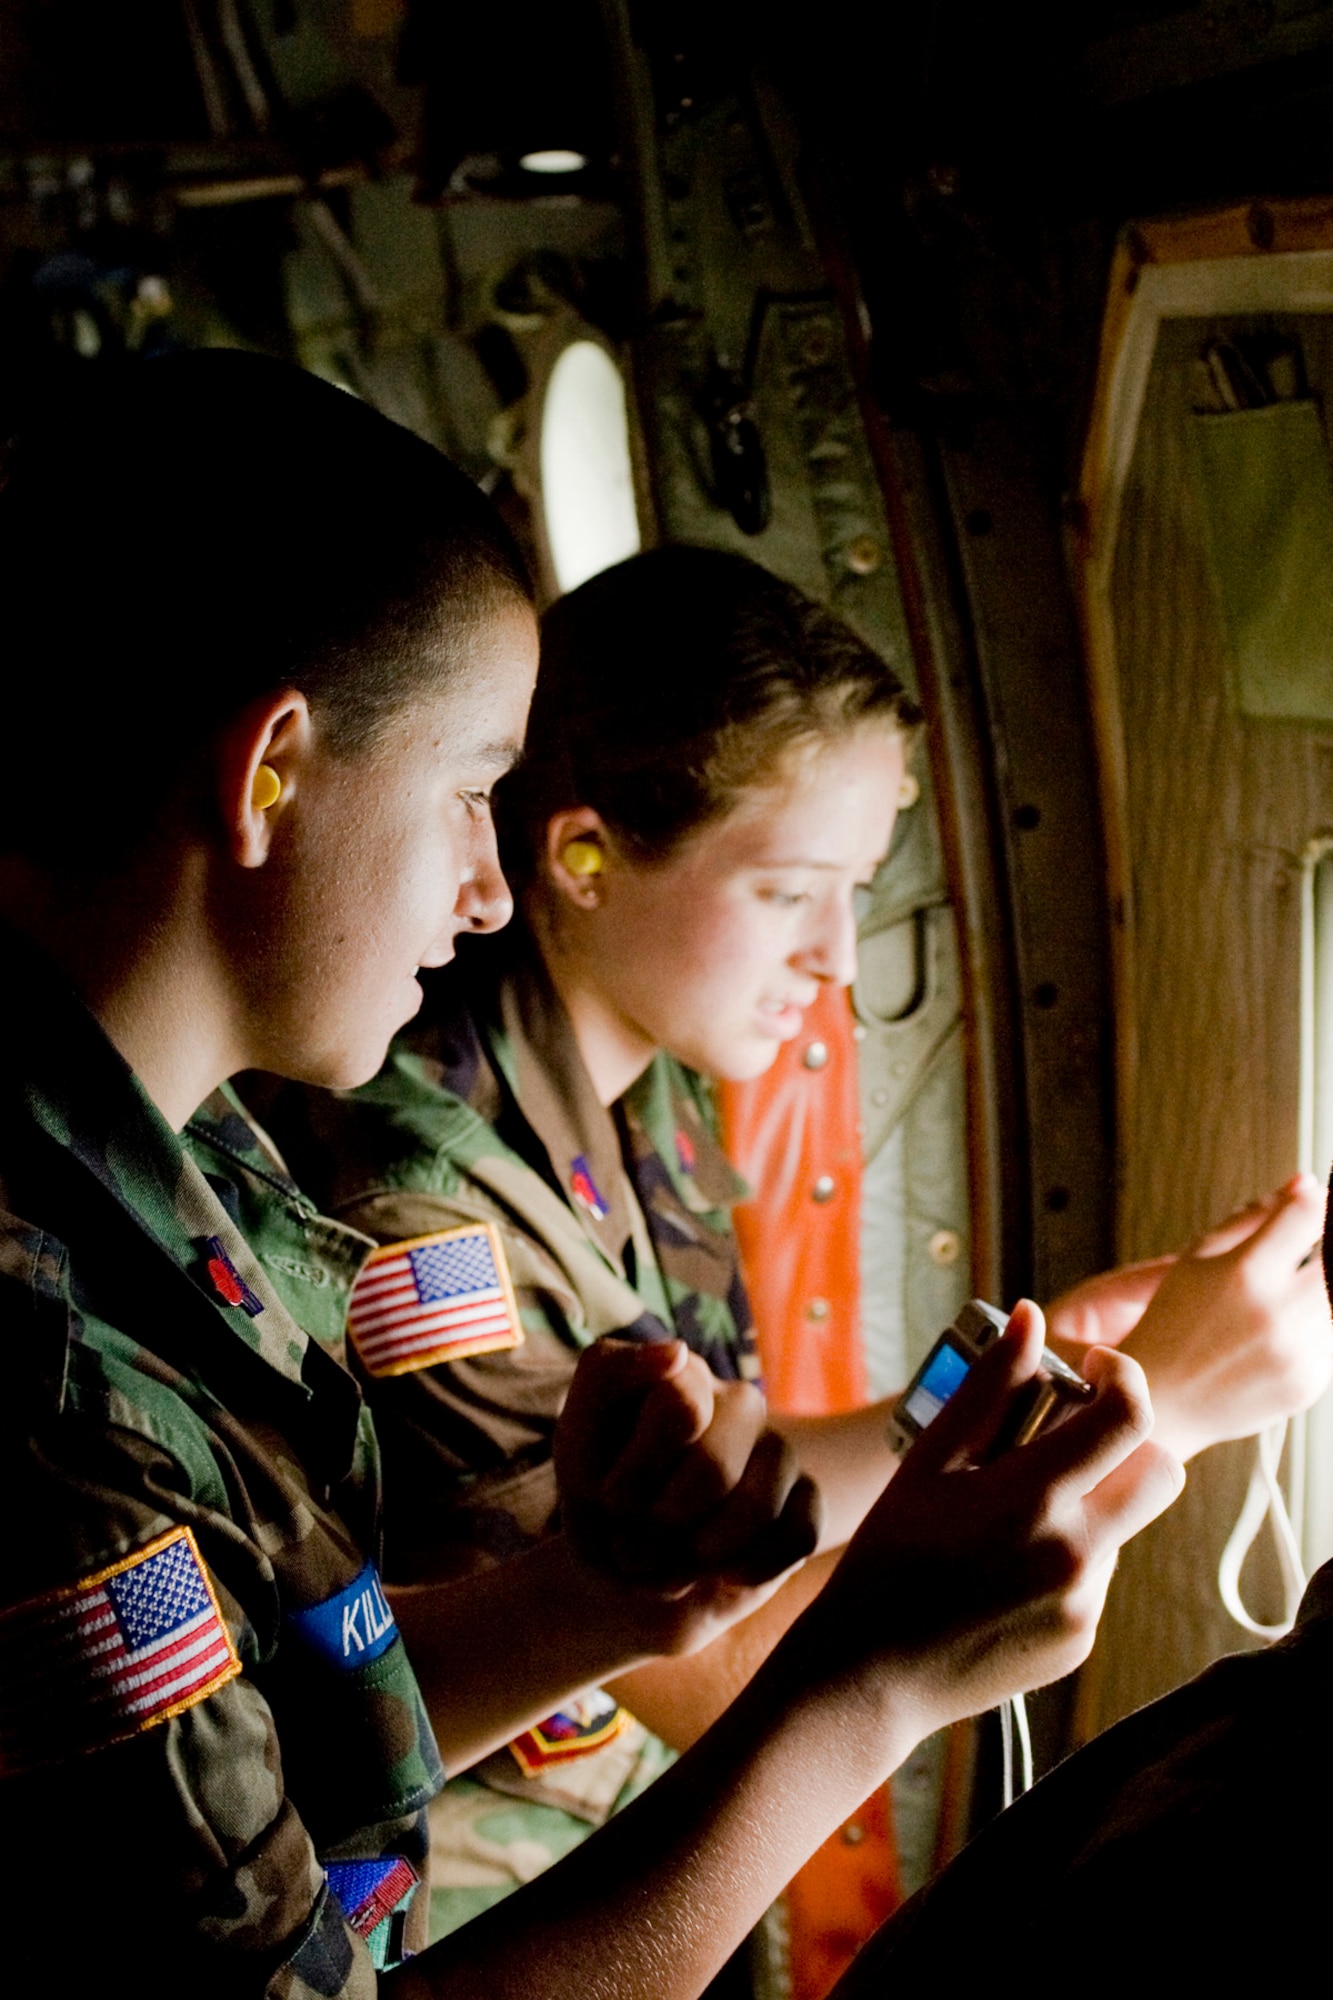 YOUNGSTOWN AIR RESERVE STATION, Ohio--A pair of Civil Air Patrol (CAP) cadets take pictures through the window of a C130H aircraft during a flight to Wright-Patterson Air Force Base (AFB). Approximately 130 cadets flew to Wright-Patterson AFB Wednesday as part of a week-long CAP encampment here. While at Wright-Patterson AFB, the cadets toured the National Museum of the US Air Force.